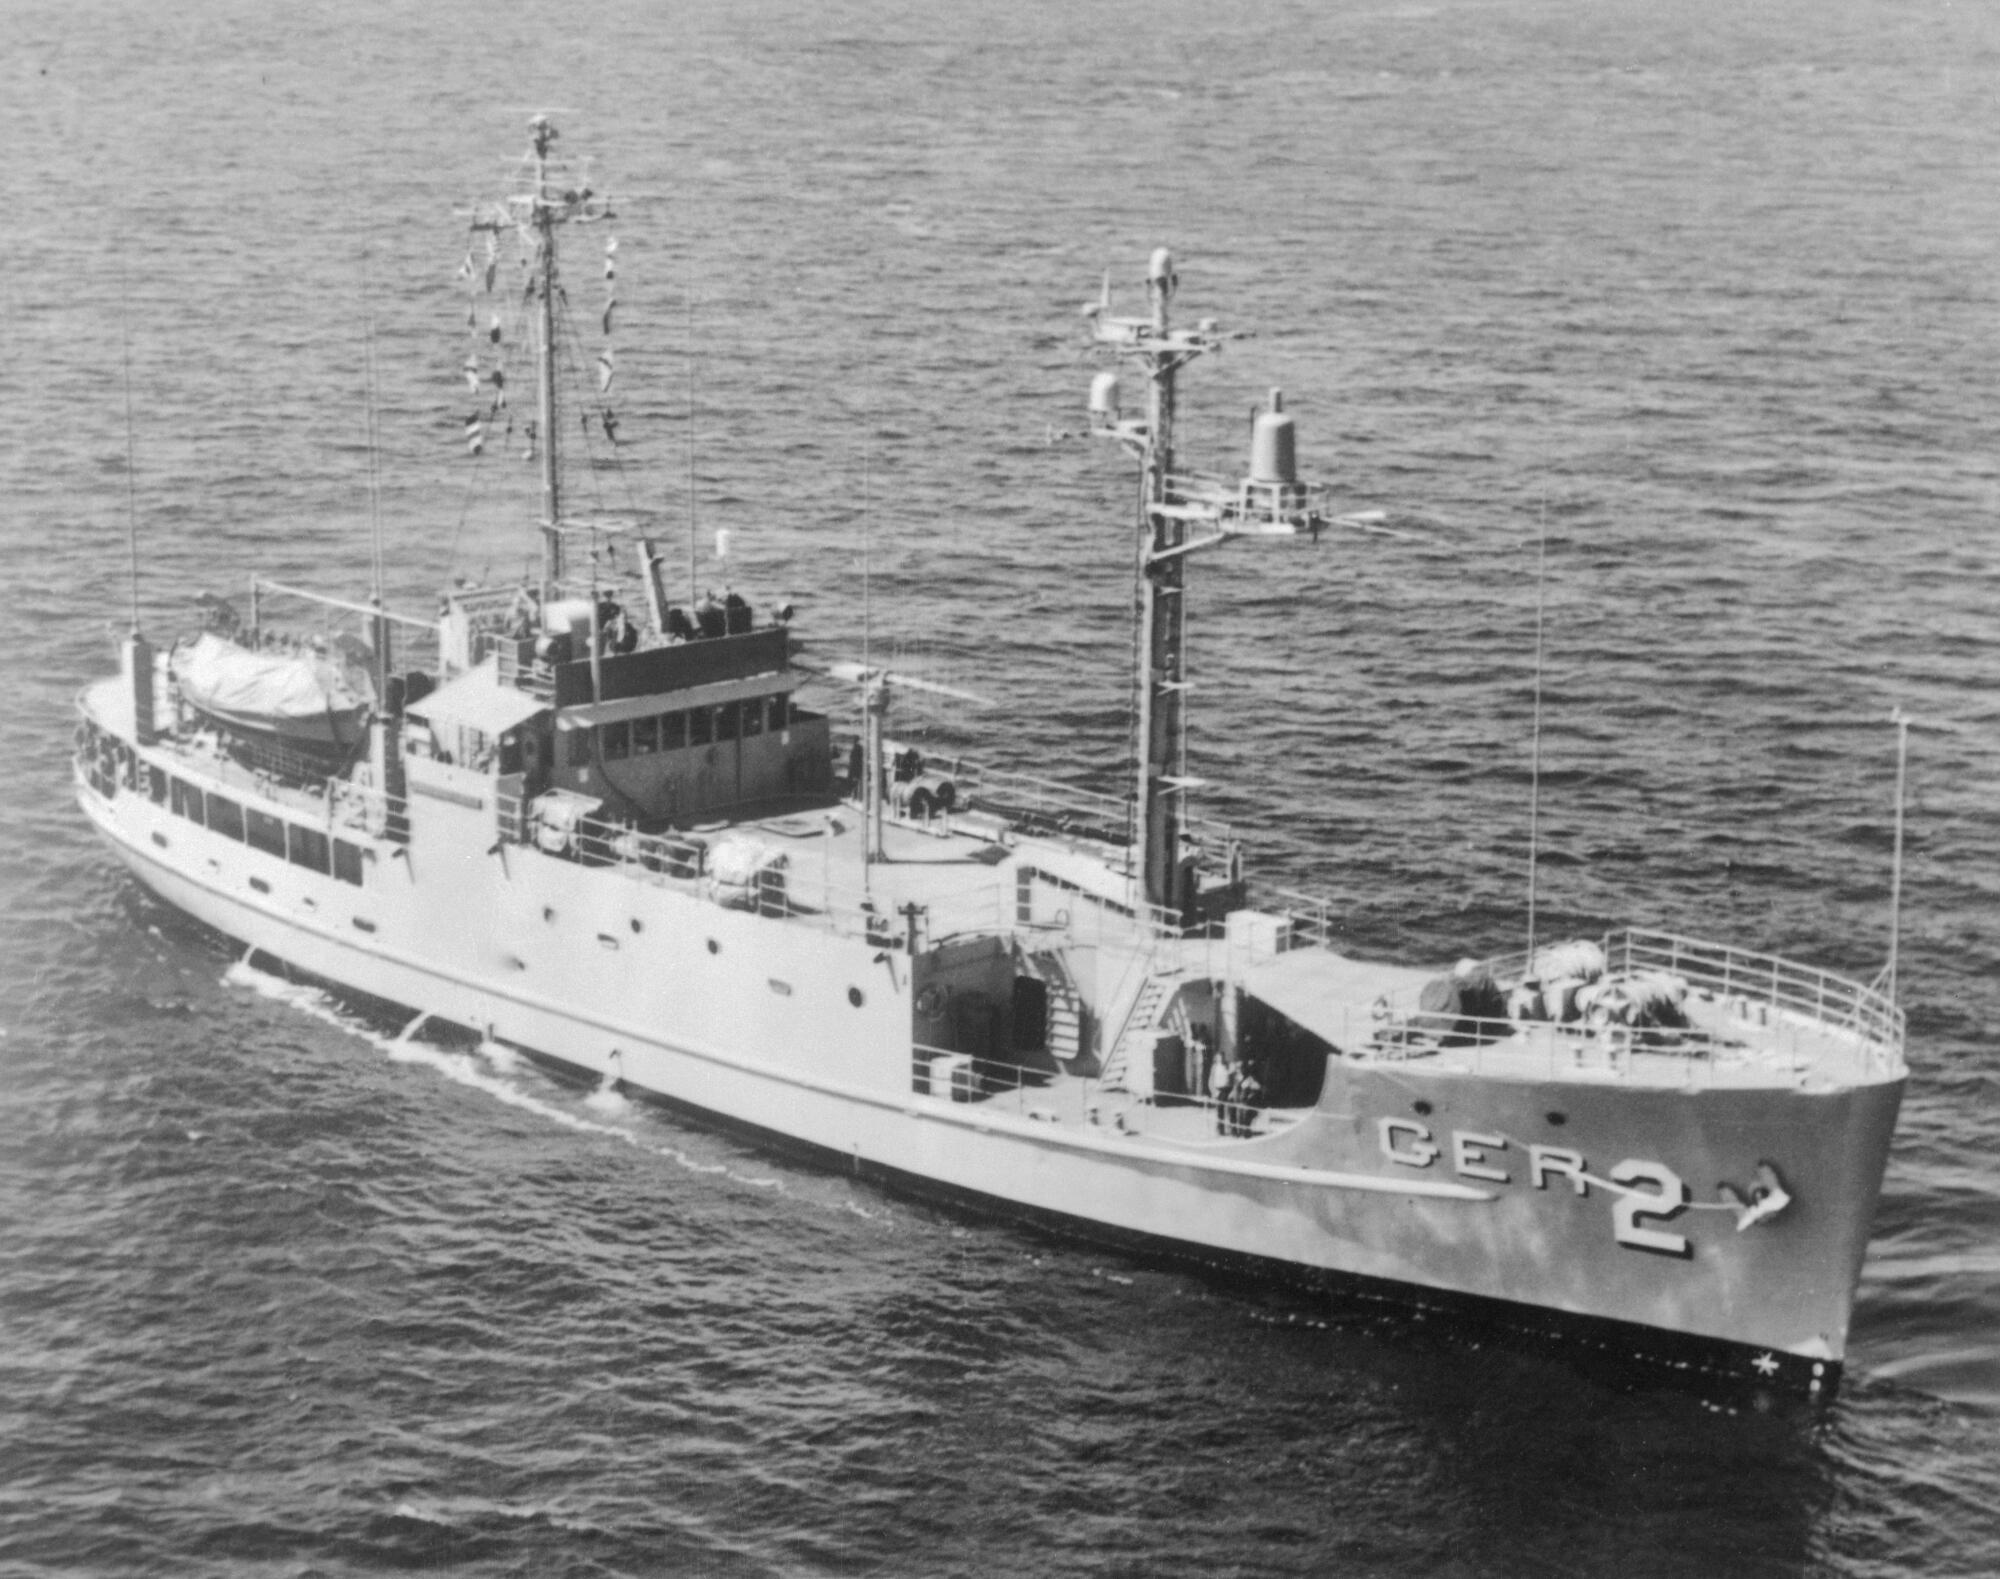 A North Korean Naval force seized the American intelligence ship, USS Pueblo on the high seas in 1968.